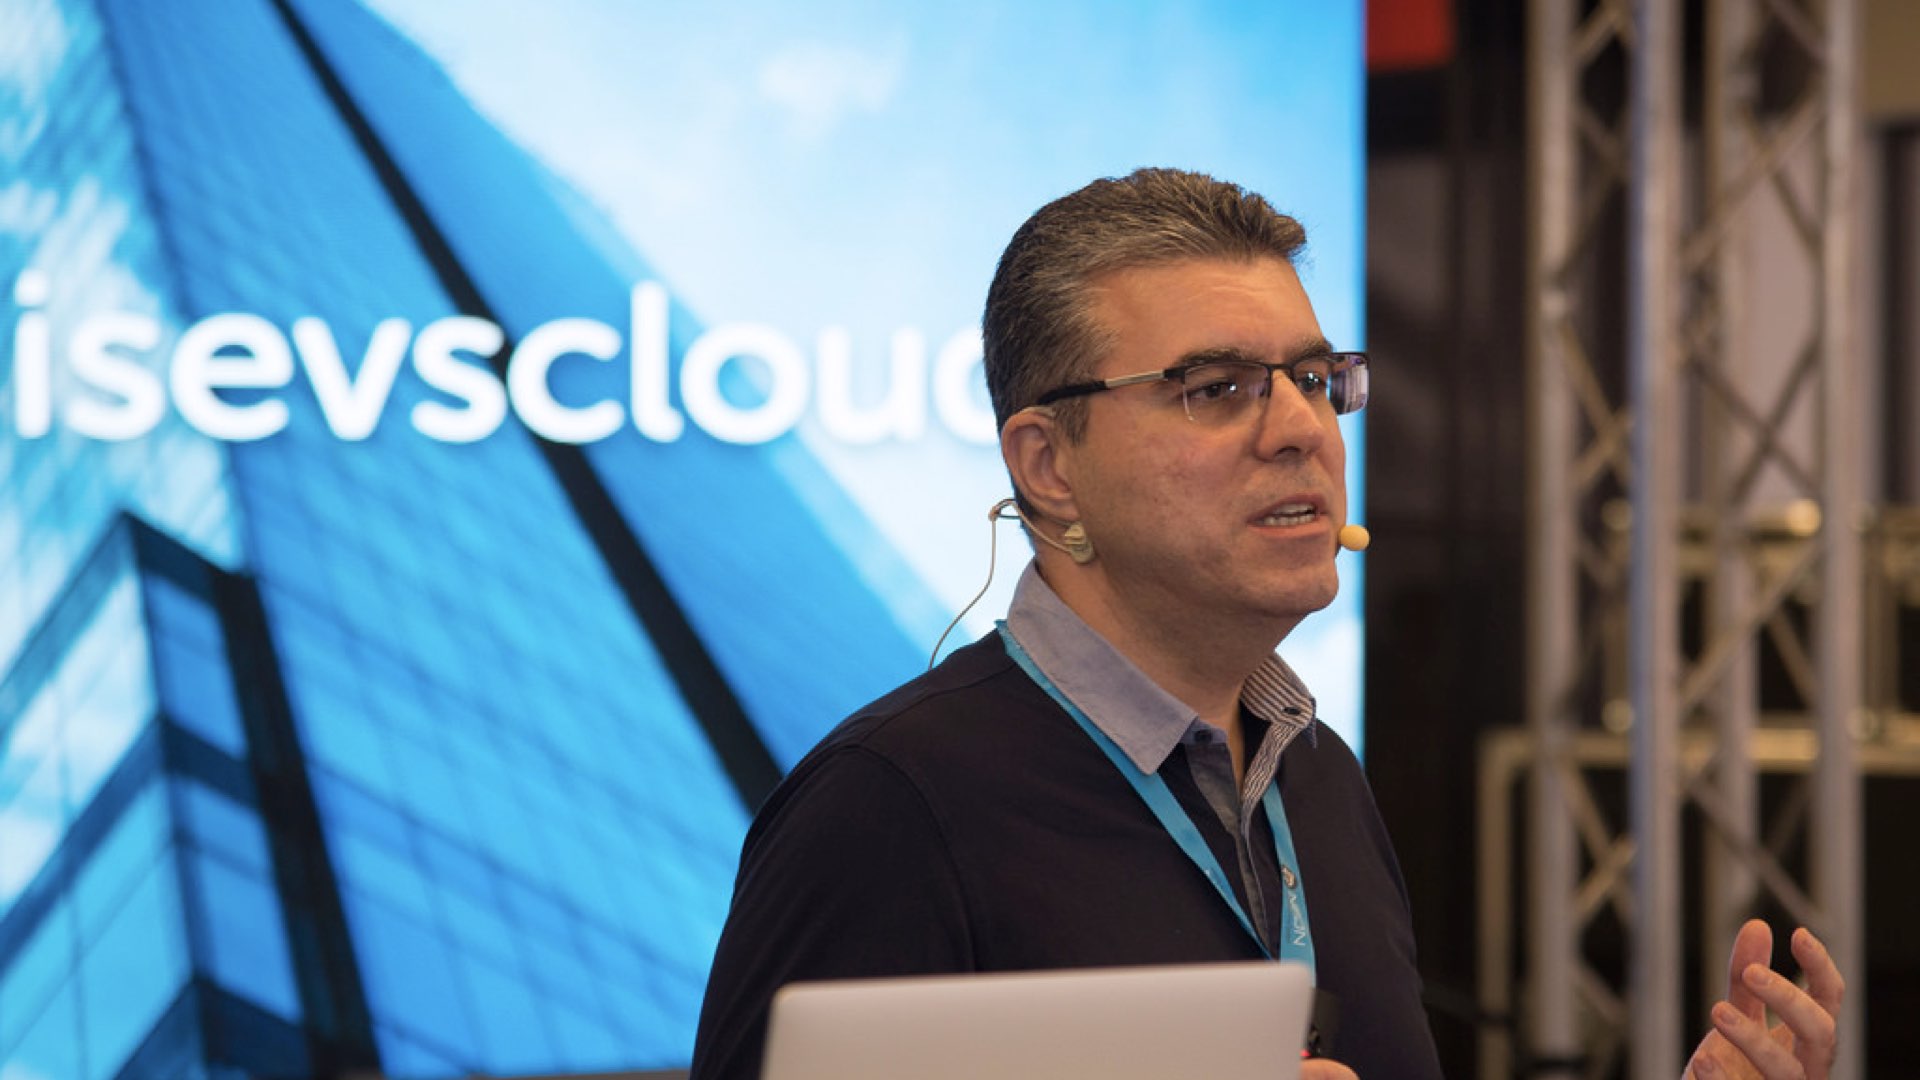 Iván Sixto during voip2day 2018 conference